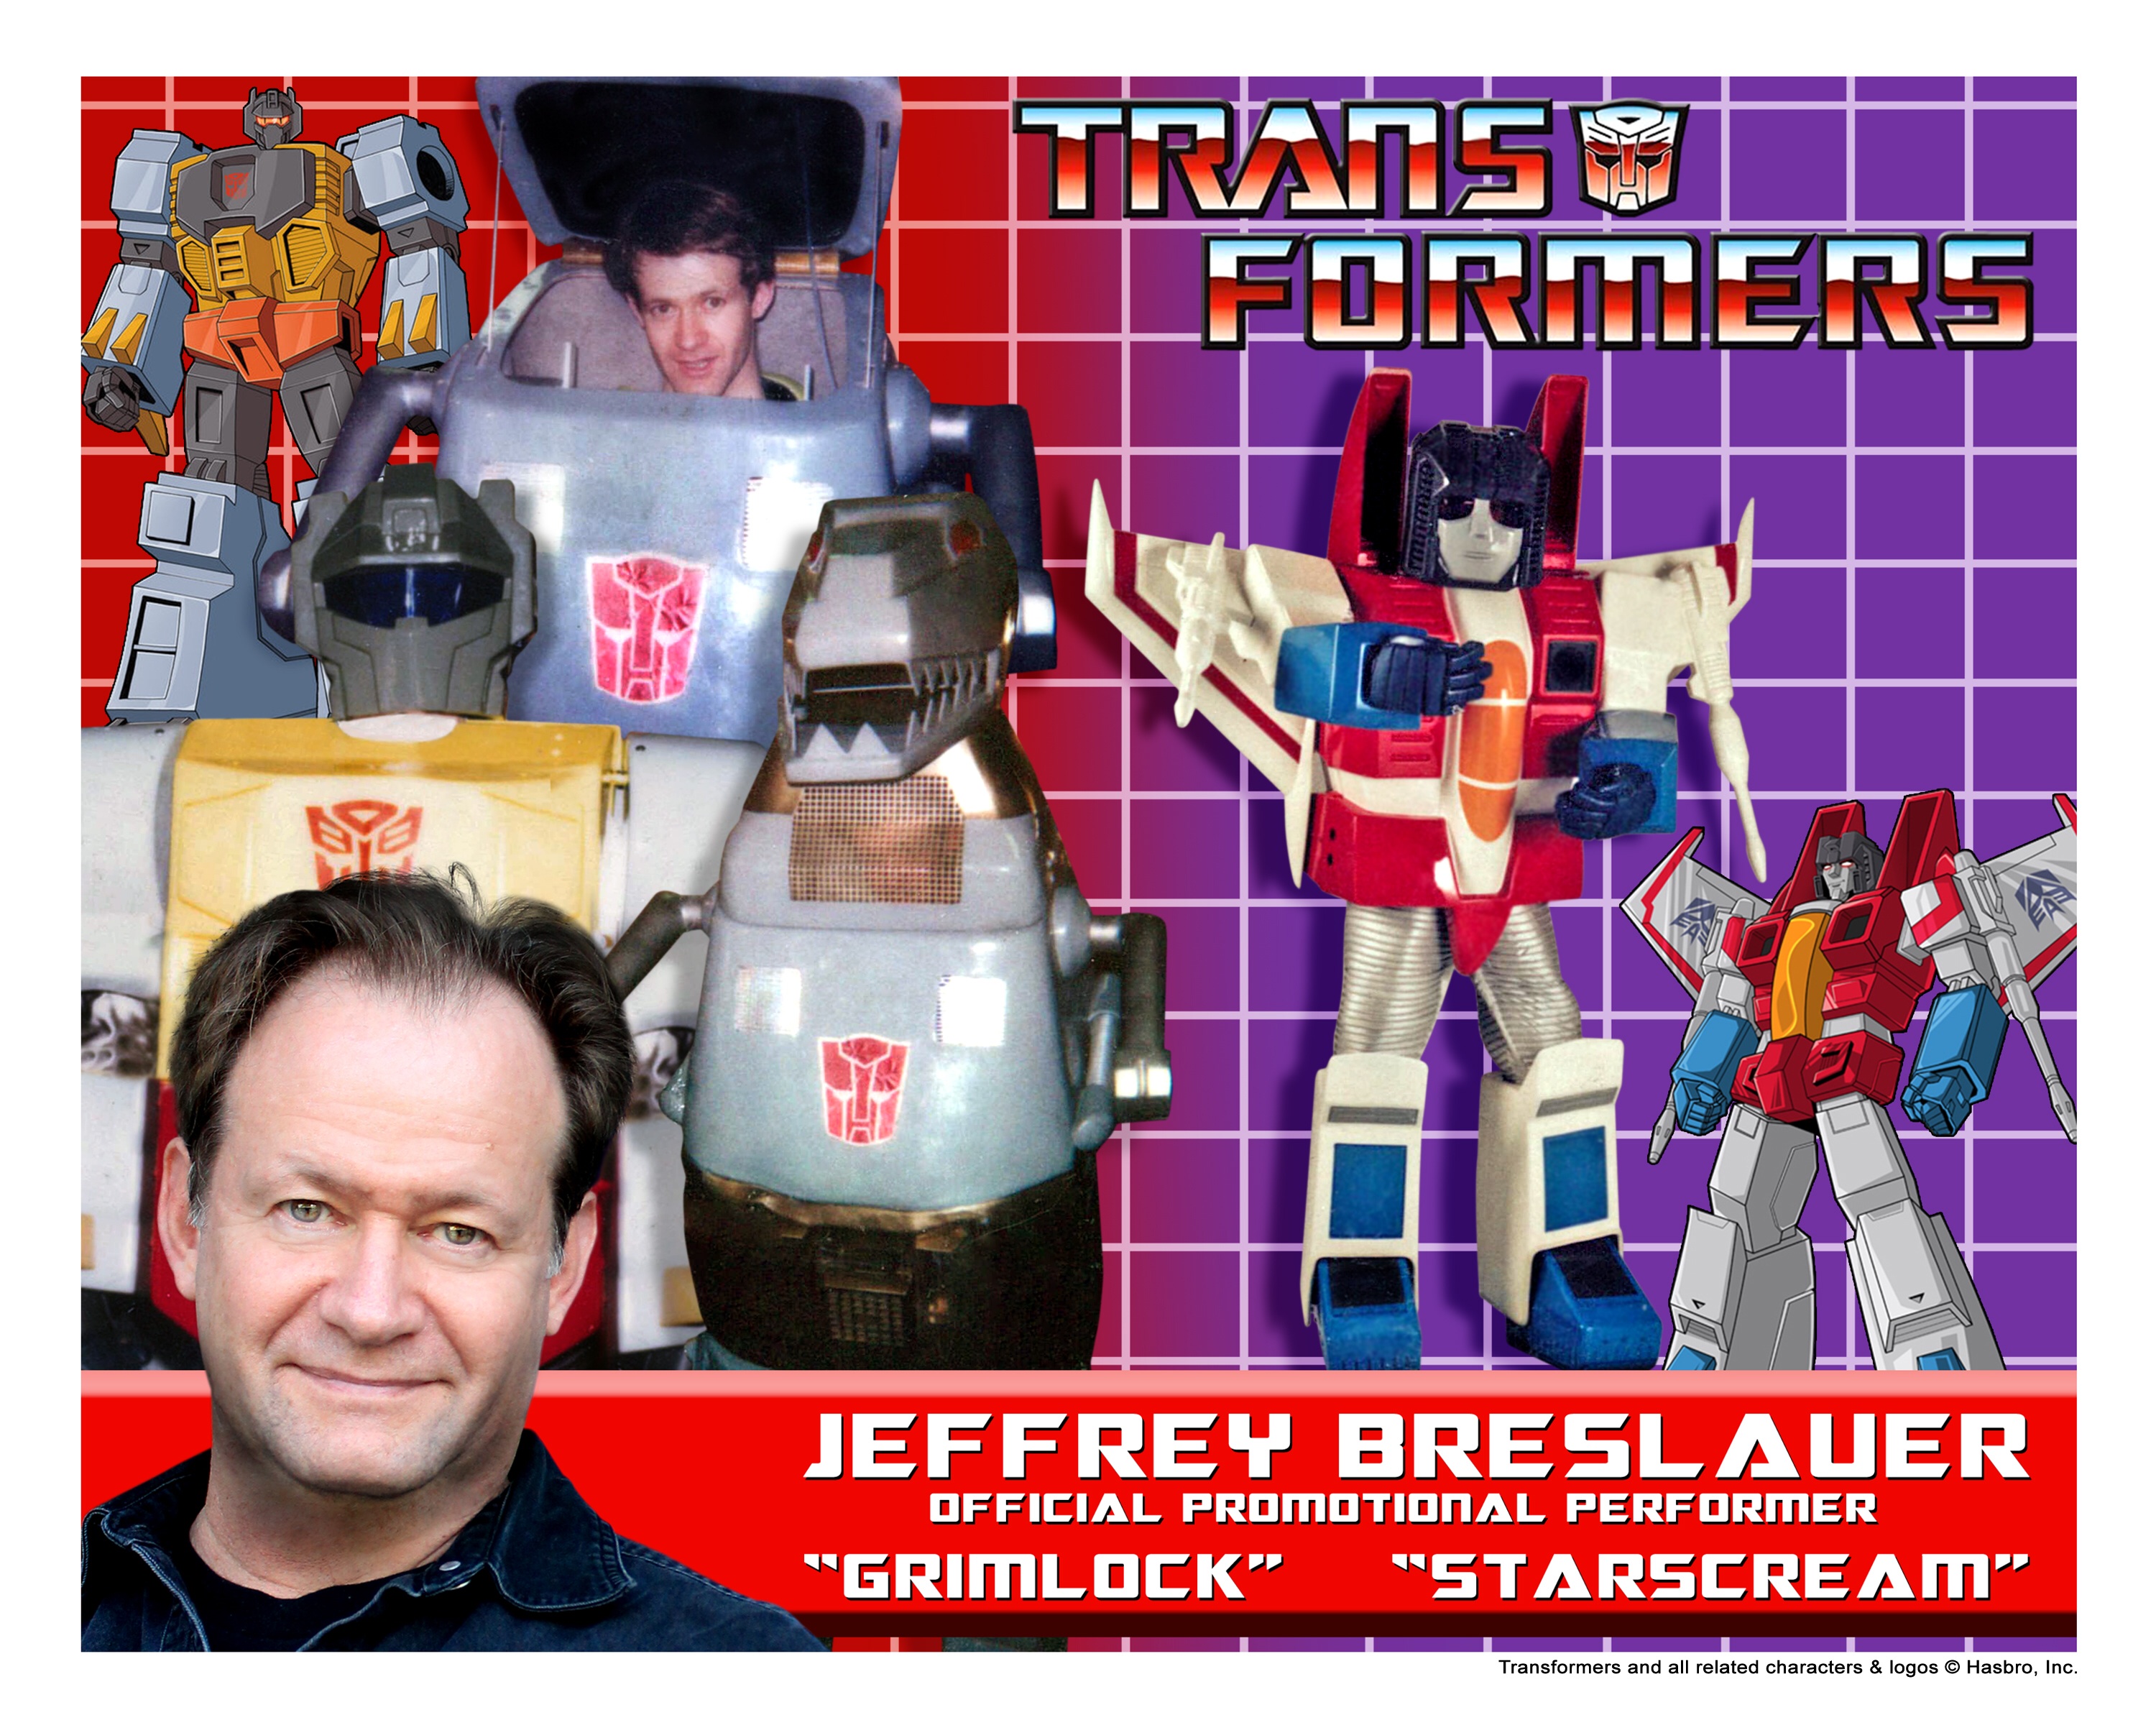 Photos of me in the Transformers suits were taken in 1984-85. This collage was created for me, by Peter Gould.